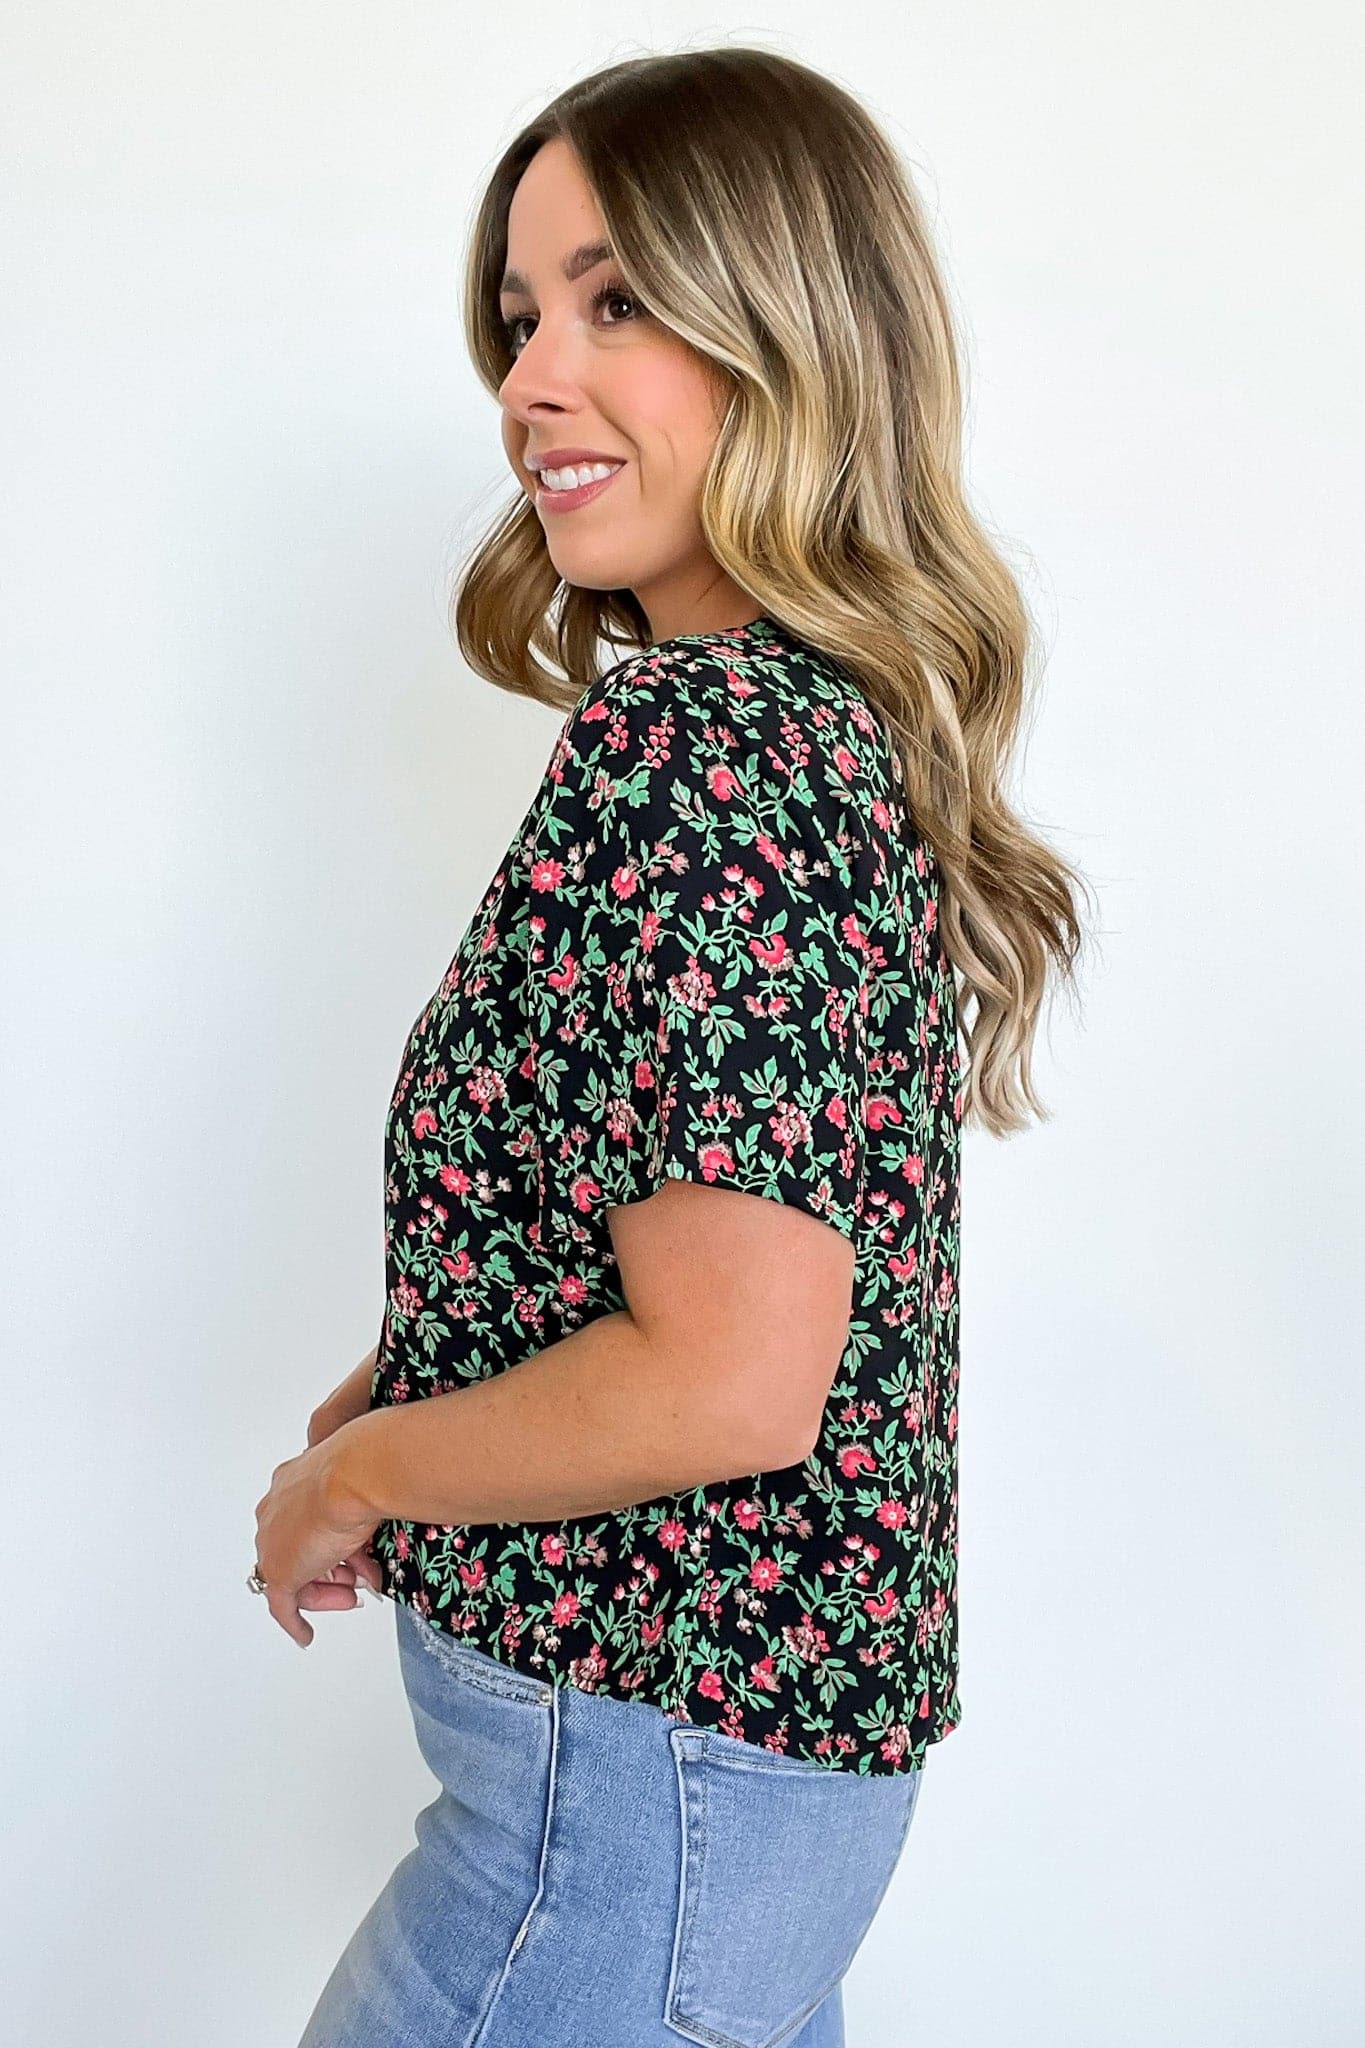  Graylynn V-Neck Floral Print Top - FINAL SALE - Madison and Mallory